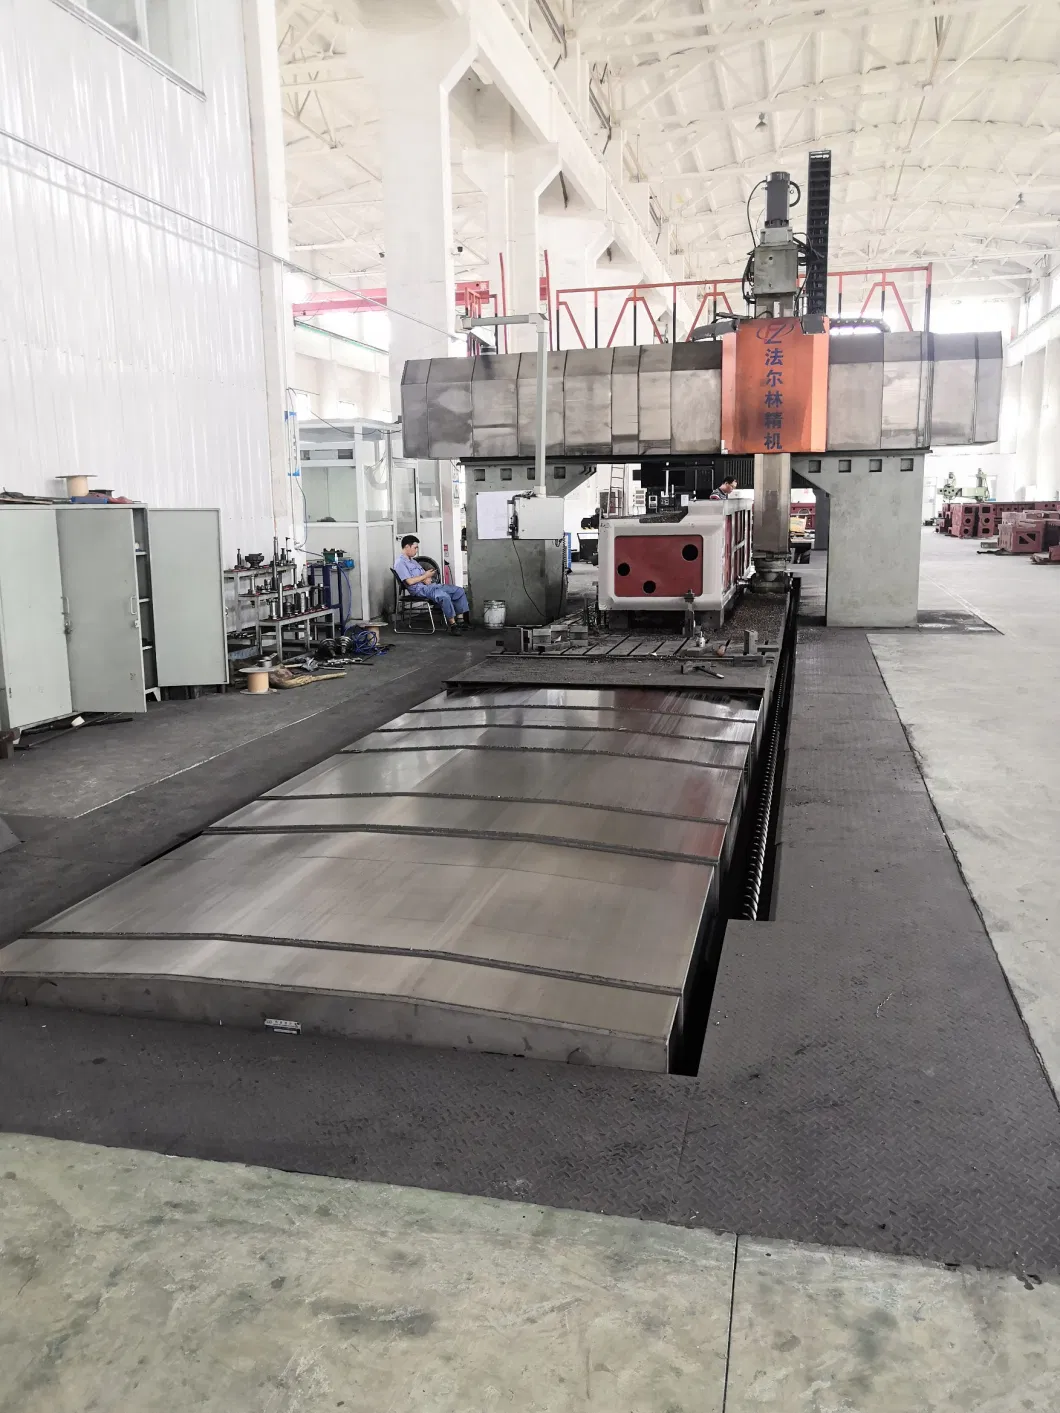 Large Bearing Capacity Fixed Beam Gantry CNC Milling Machine for Ferrous Metals Roughing and Finishing OEM/ODM